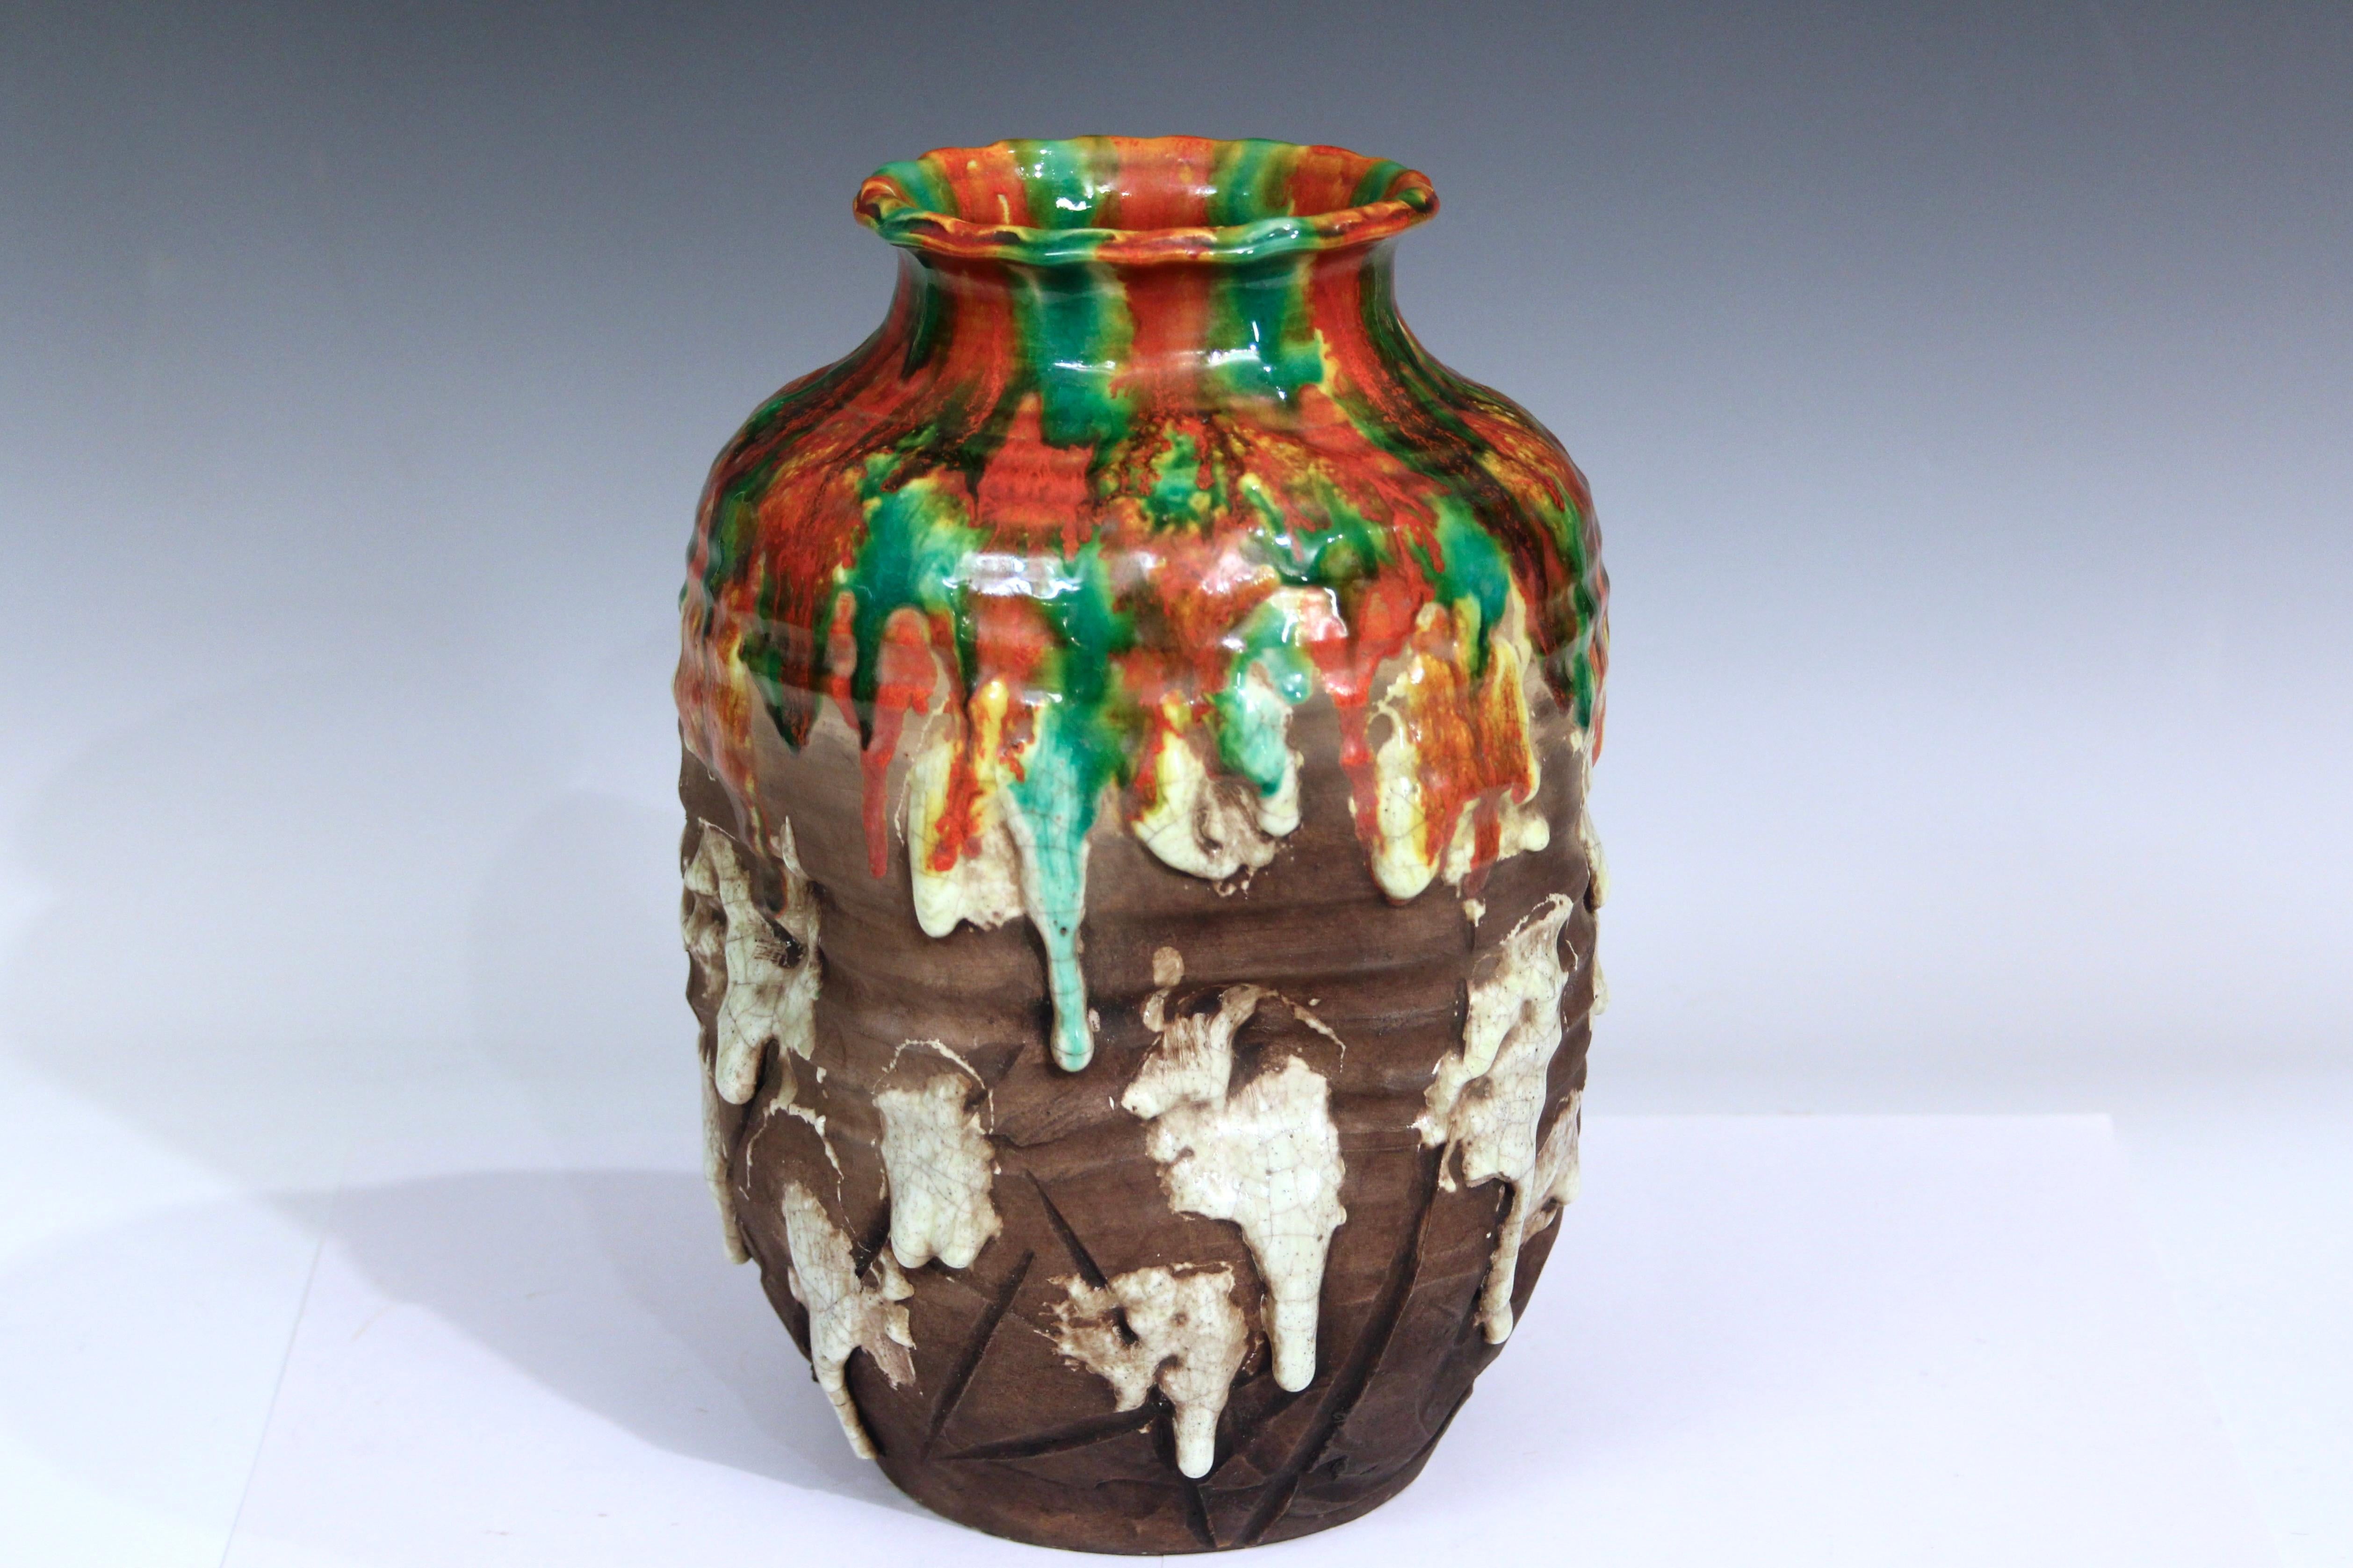 Vintage Awaji Pottery vase of manipulated clay form with multi colored frothy drip glaze, circa 1930. Impressed marks. 10 1/2